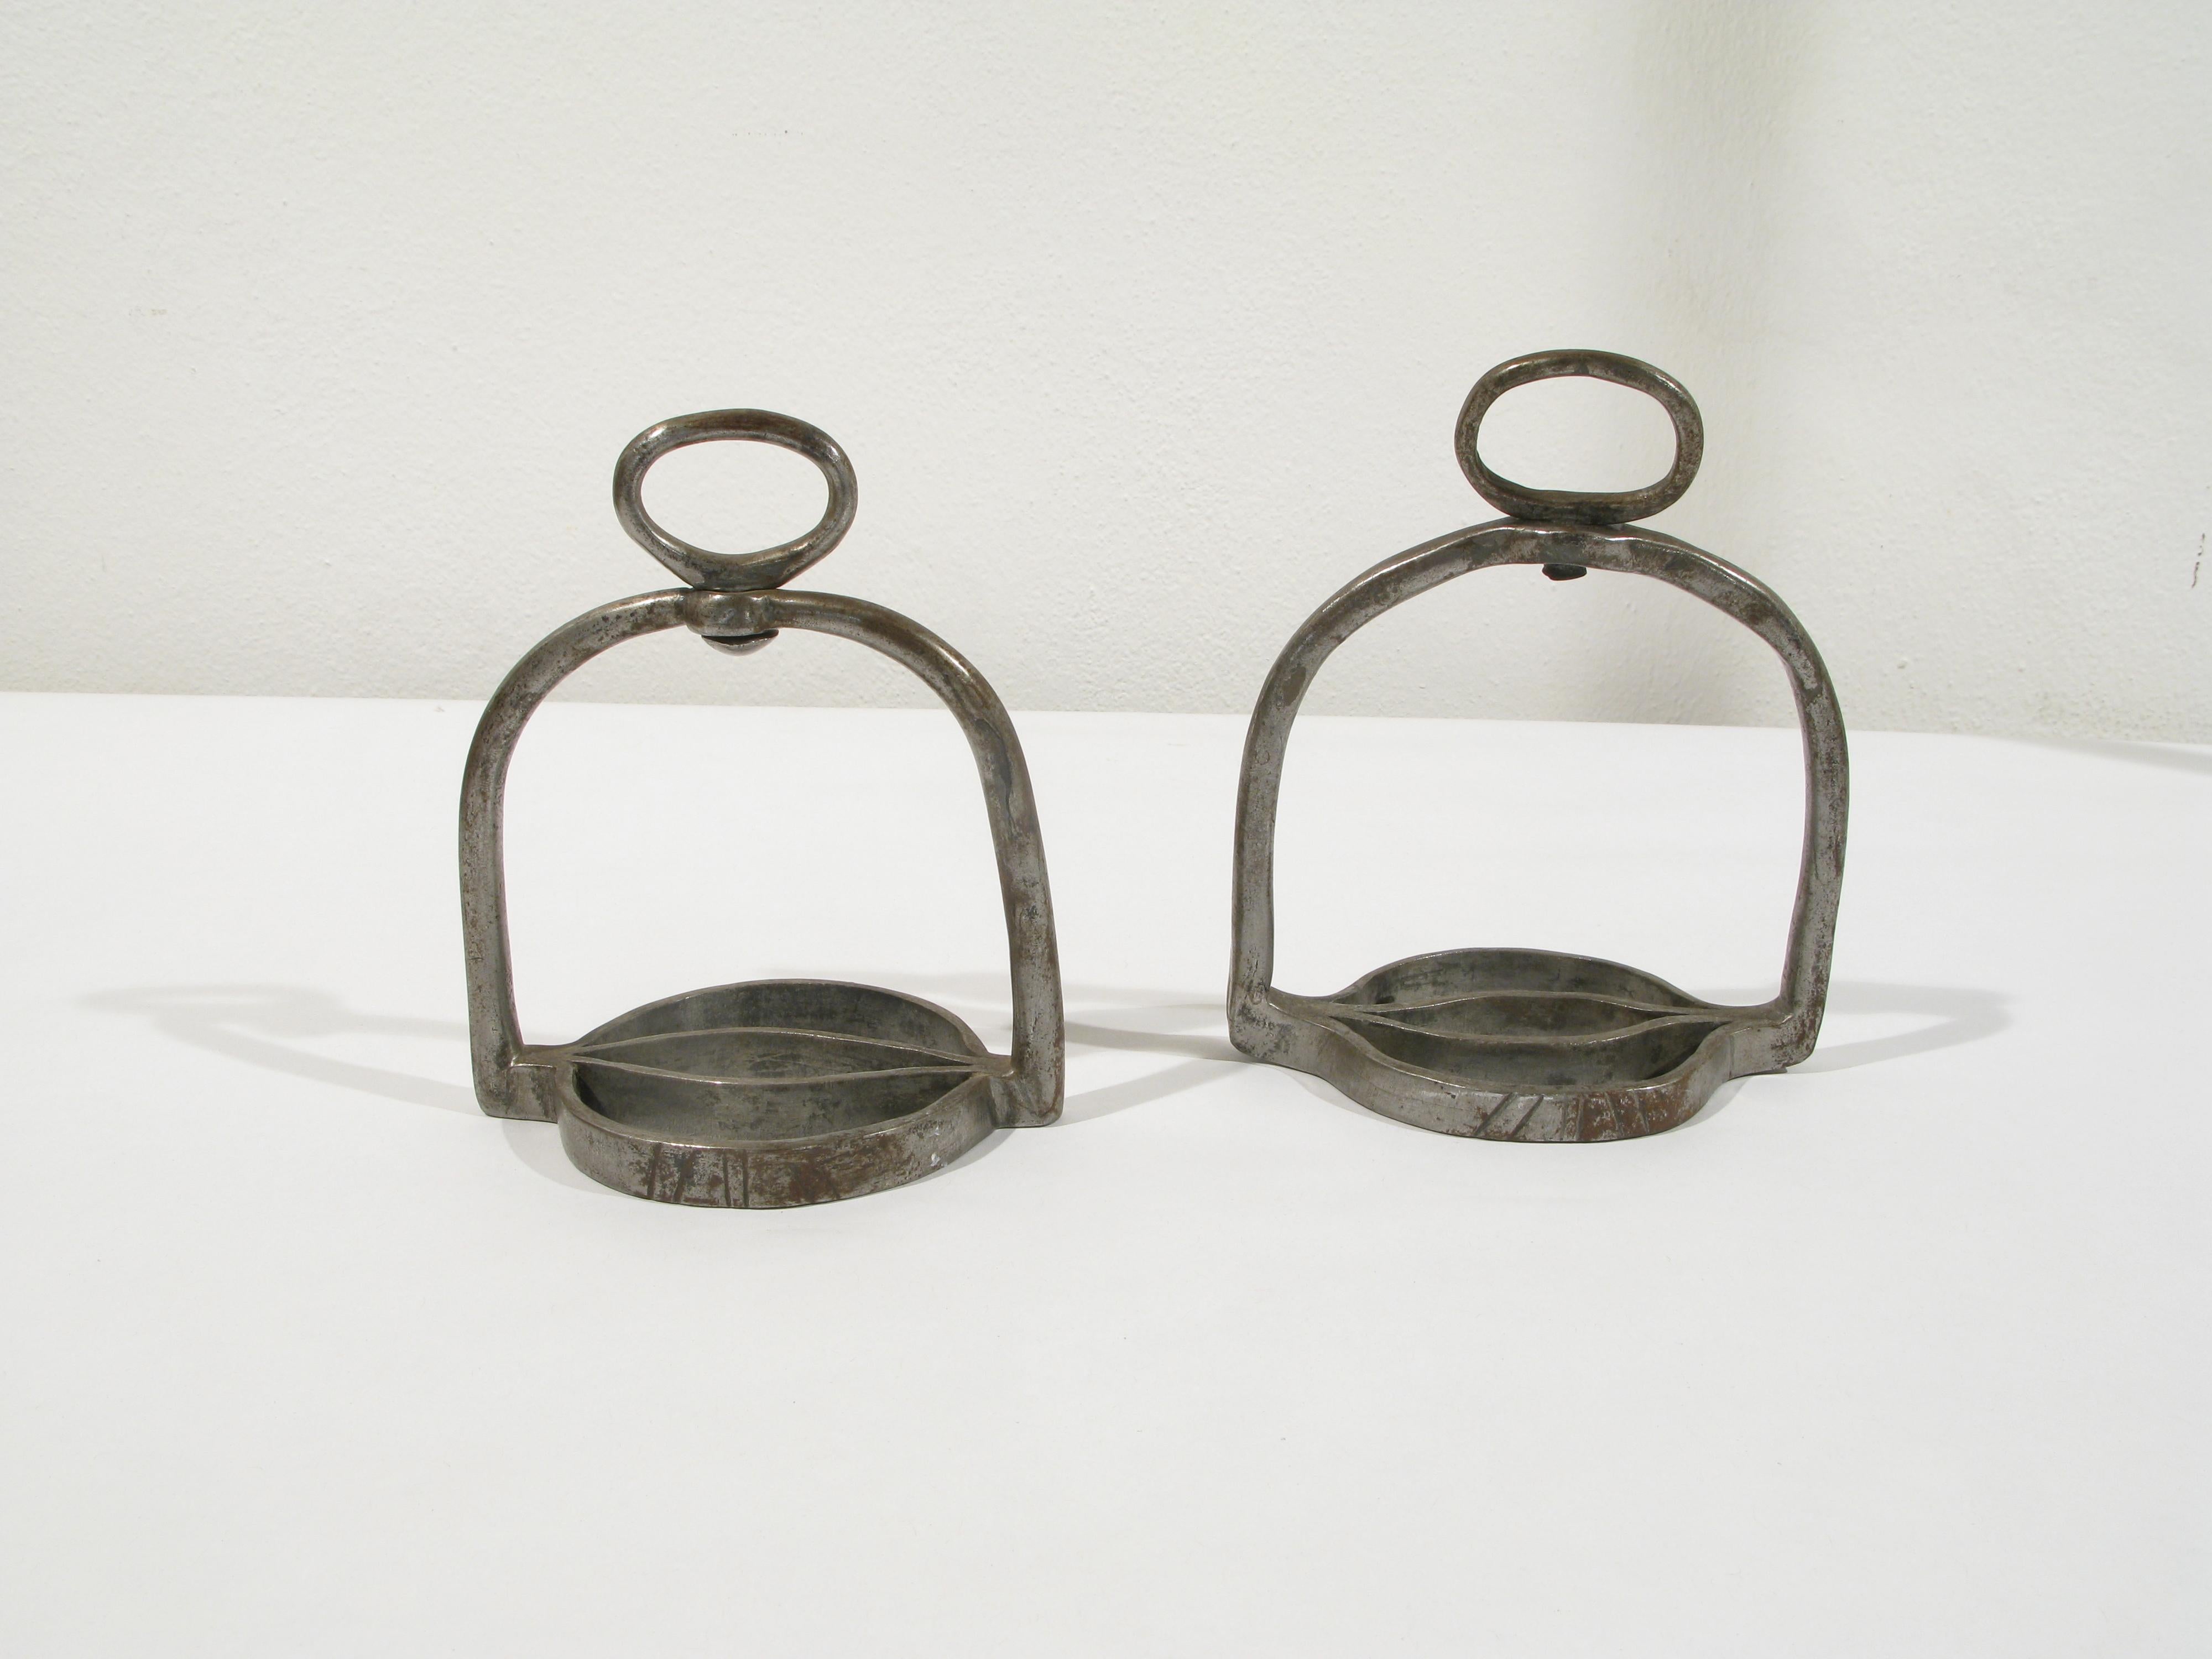 Pair of 19th century riding stirrups  

Made of wrought and engraved iron present the base part,  where it is supported  the foot,  circular in shape. From it start two arched uprights that join at the top;  here a ring allows the brackets to be